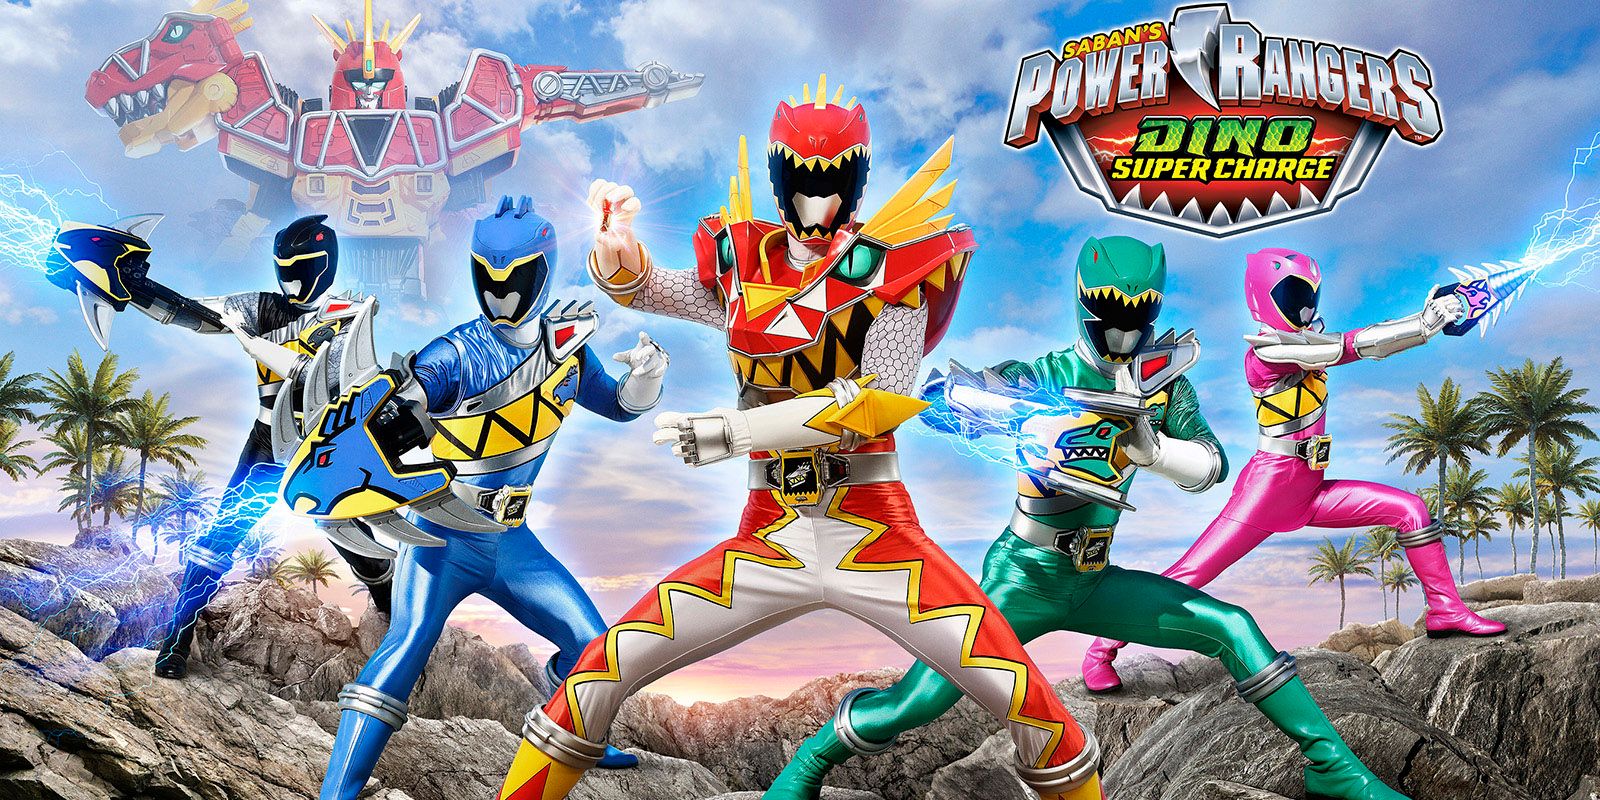 Power Rangers Dino Super Charge Exclusive